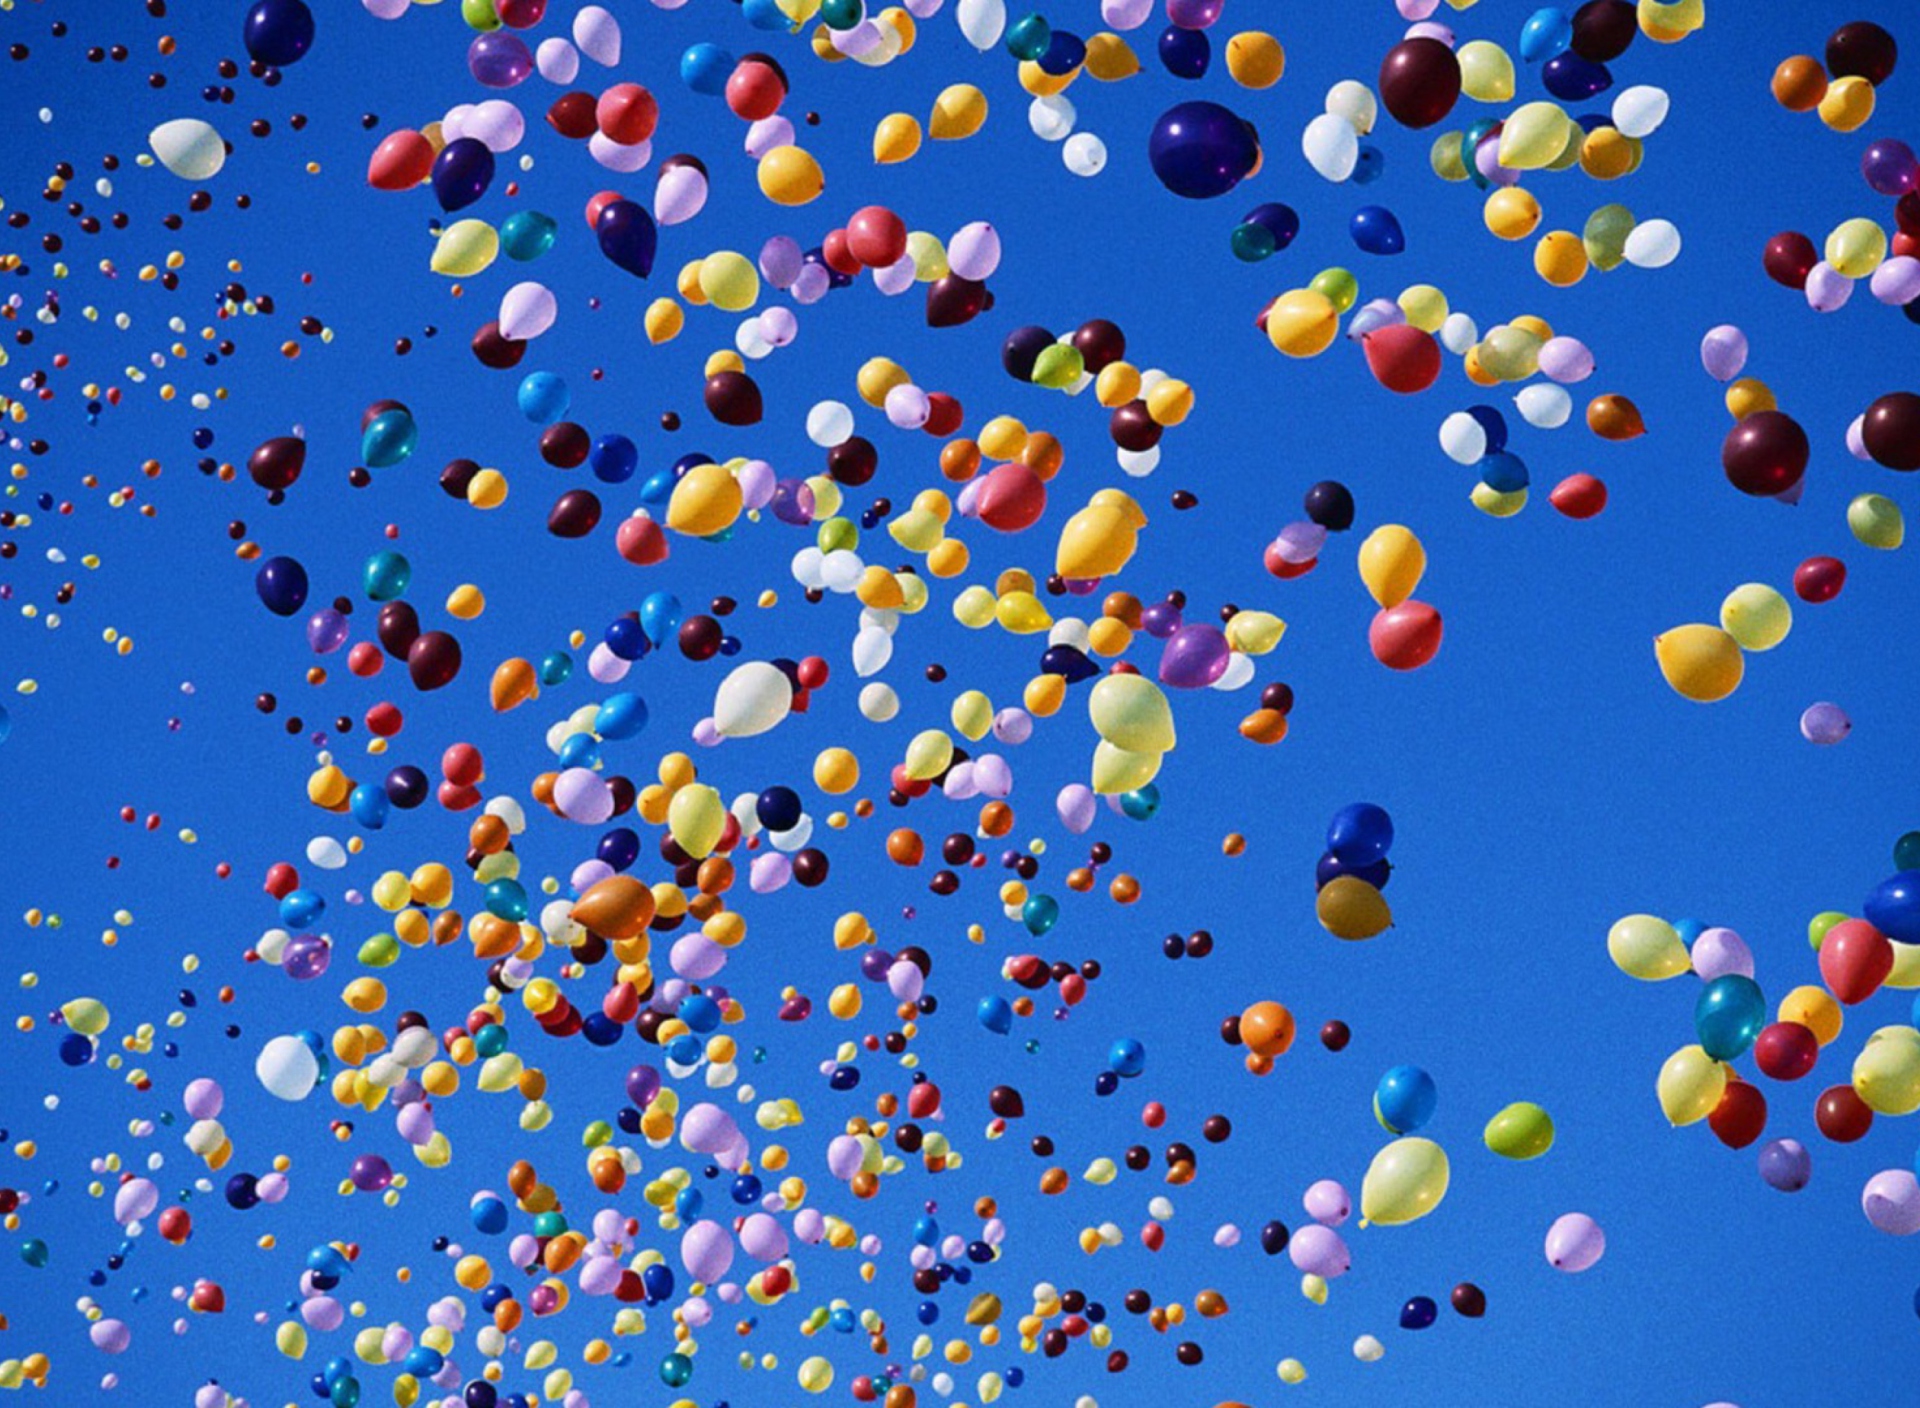 Colorful Balloons In Blue Sky screenshot #1 1920x1408